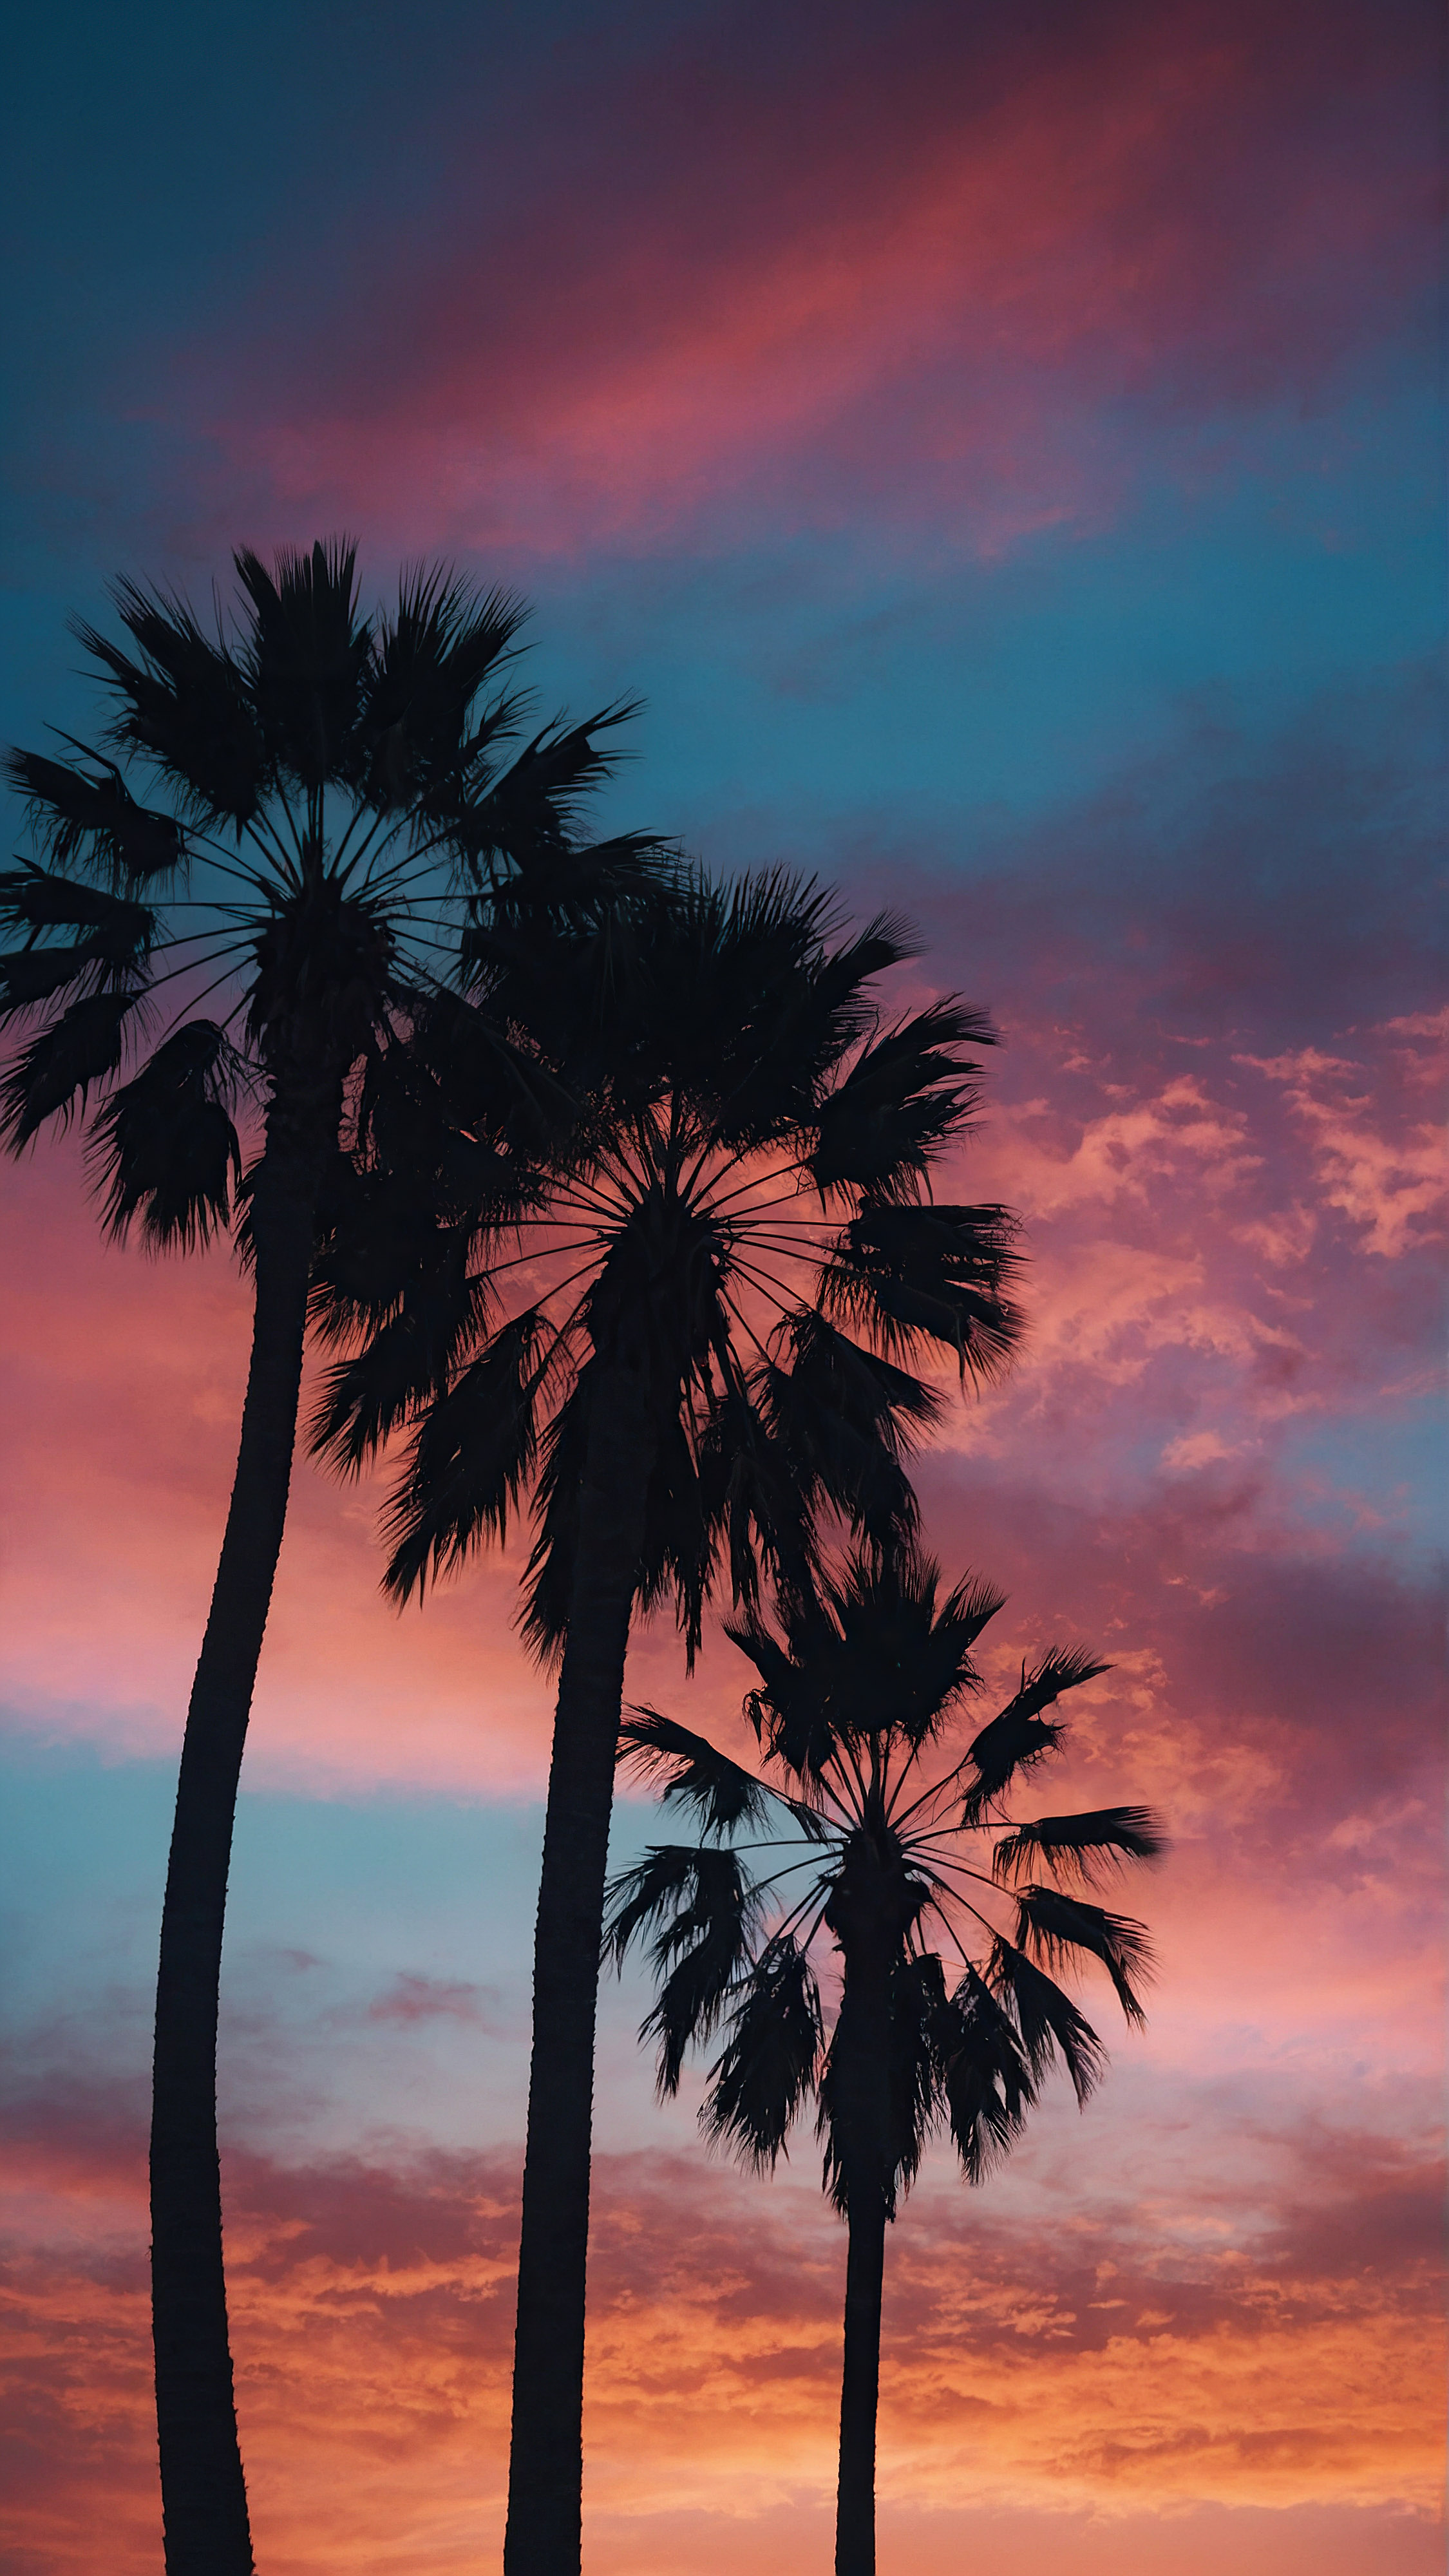 Experience the tranquility of our 4K iPhone wallpaper, showcasing a sky with a beautiful gradient of colors from deep blues to warm oranges and pinks at dusk, adorned with the silhouettes of palm trees.